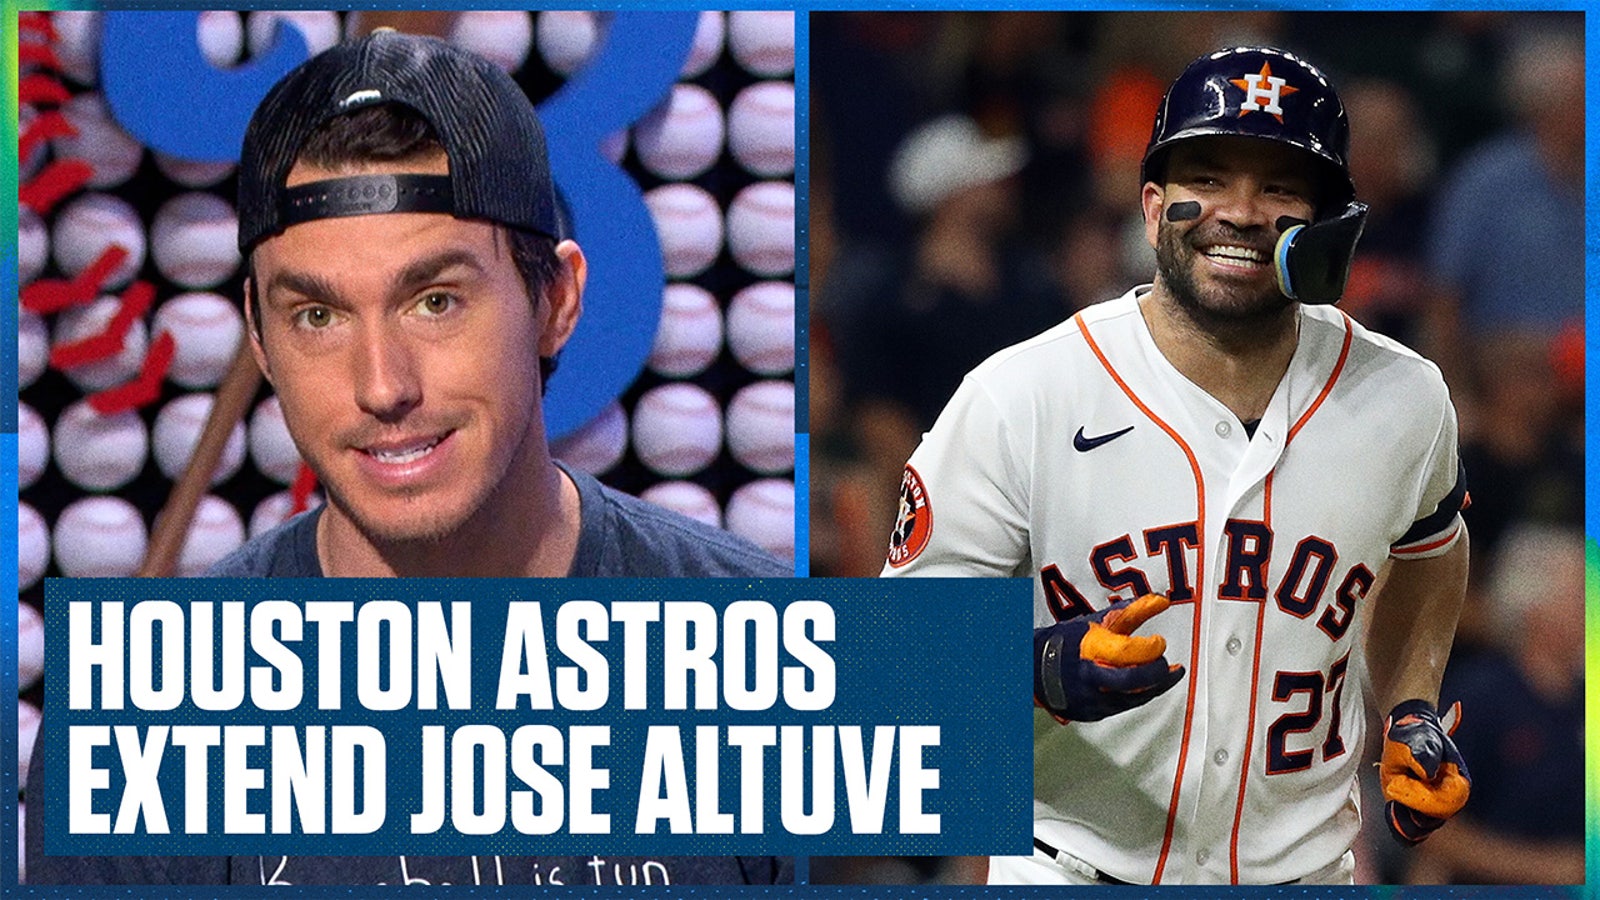 José Altuve's extension will make him ‘Astro for life'